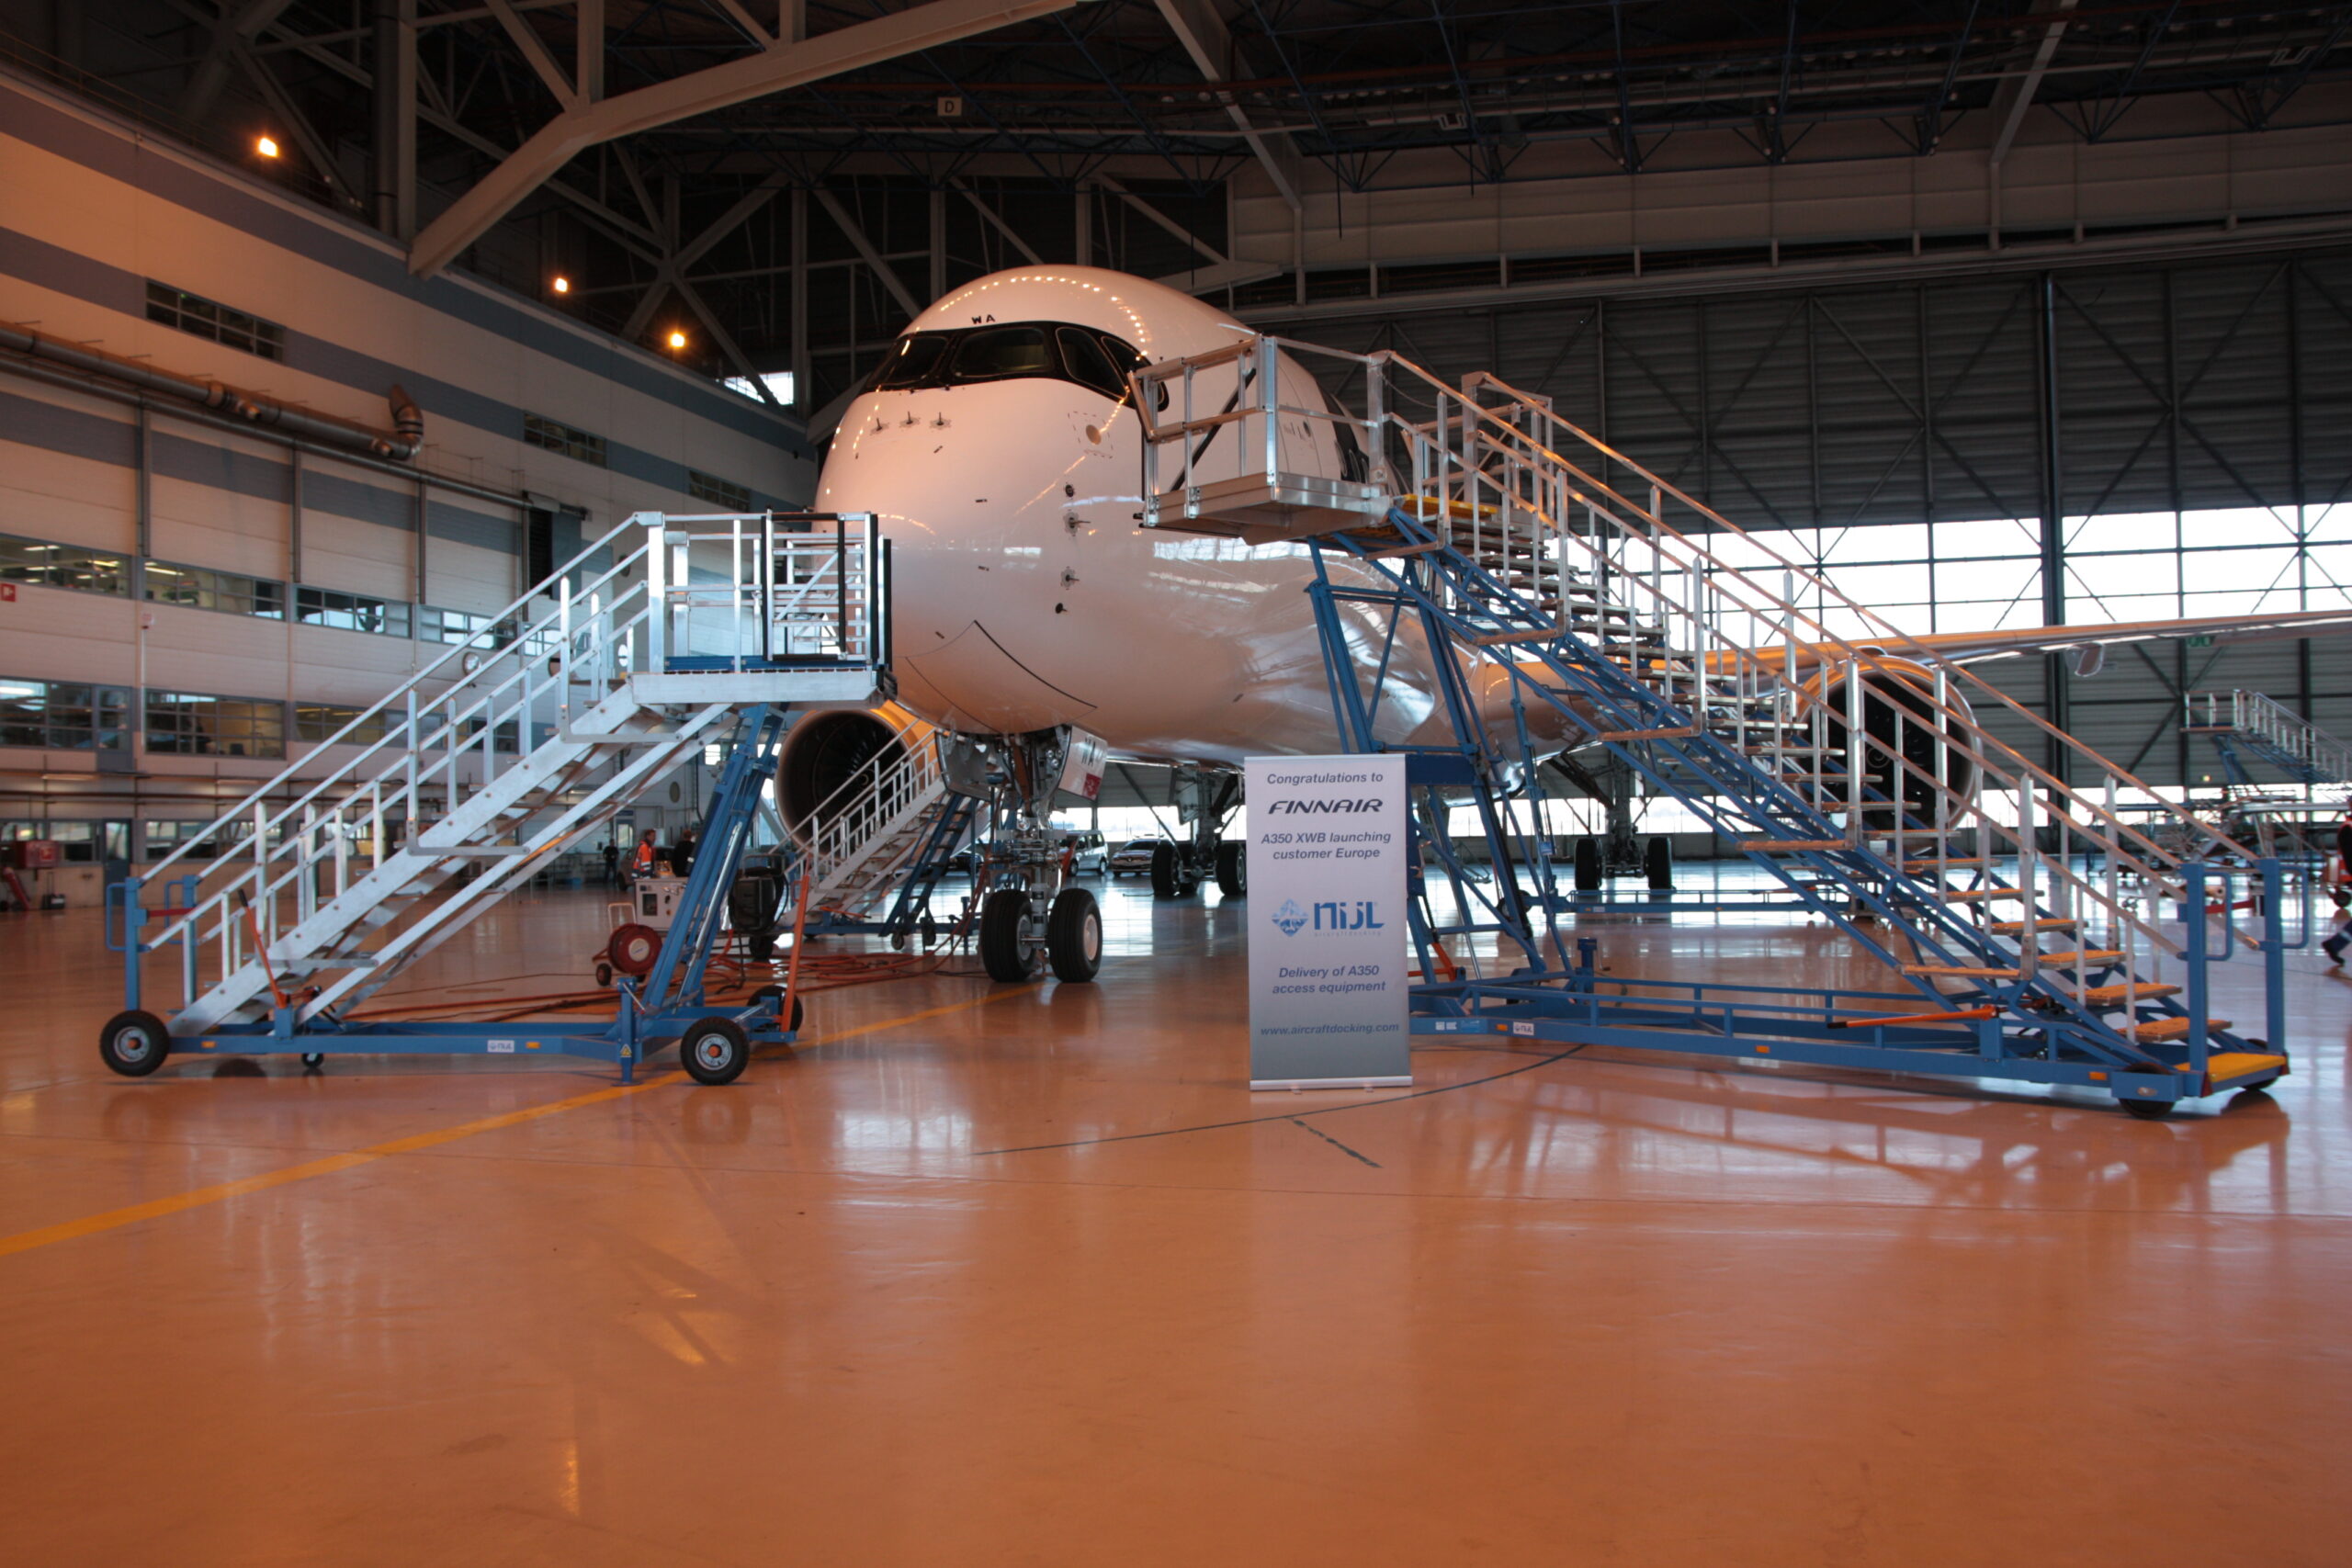 A350 ground support equipment package